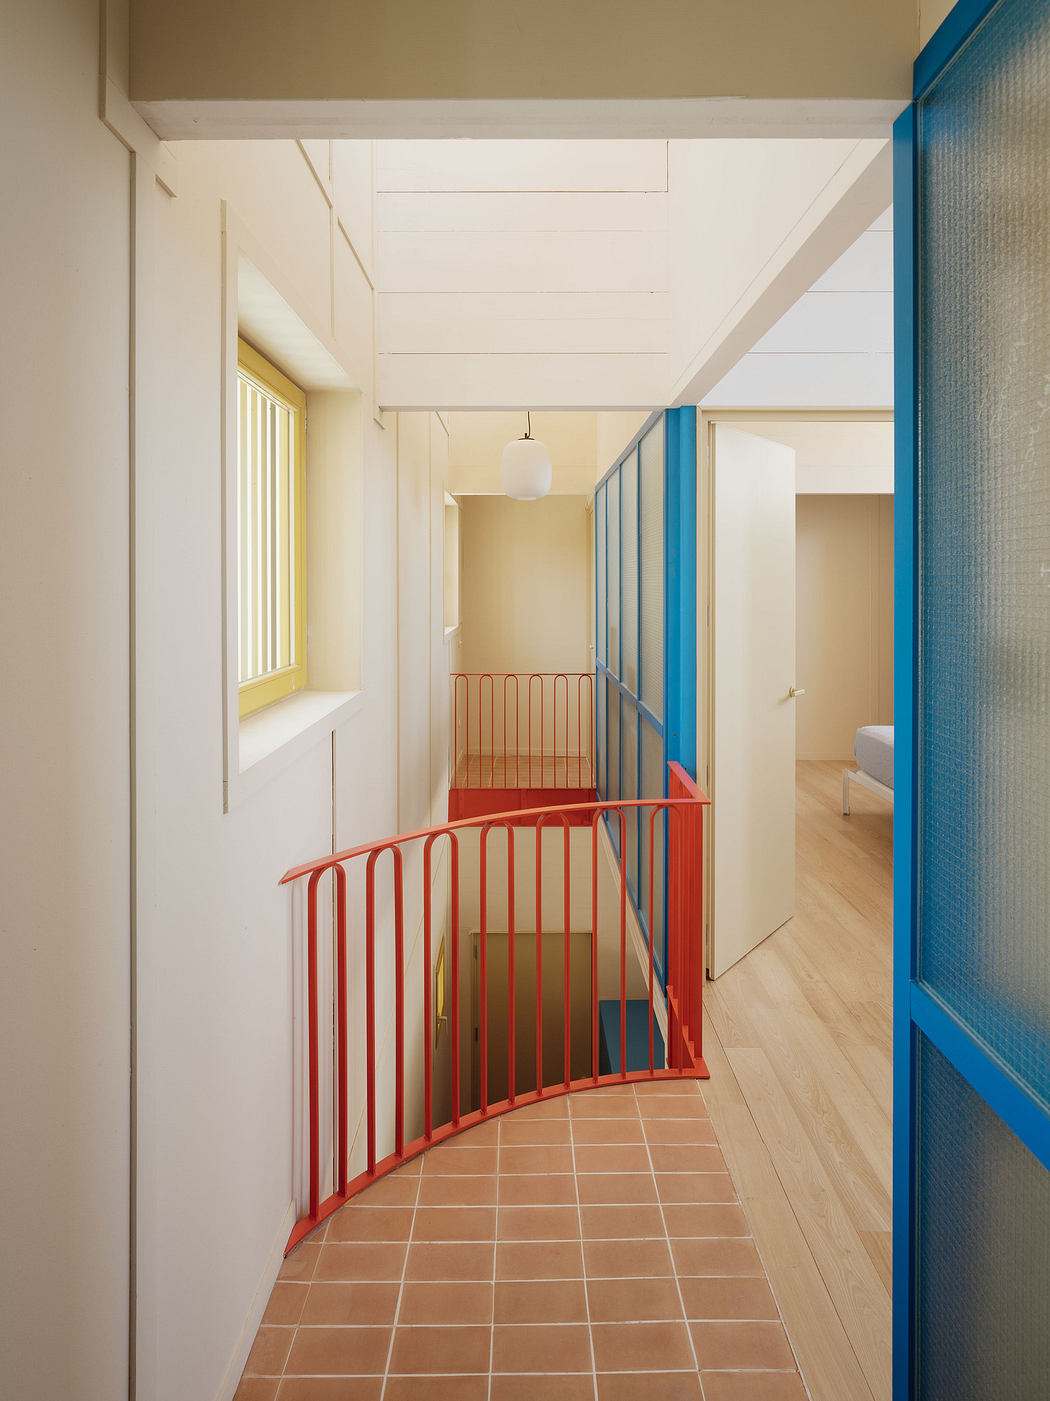 Bright interior corridor with colorful blue and red railings and translucent panels.